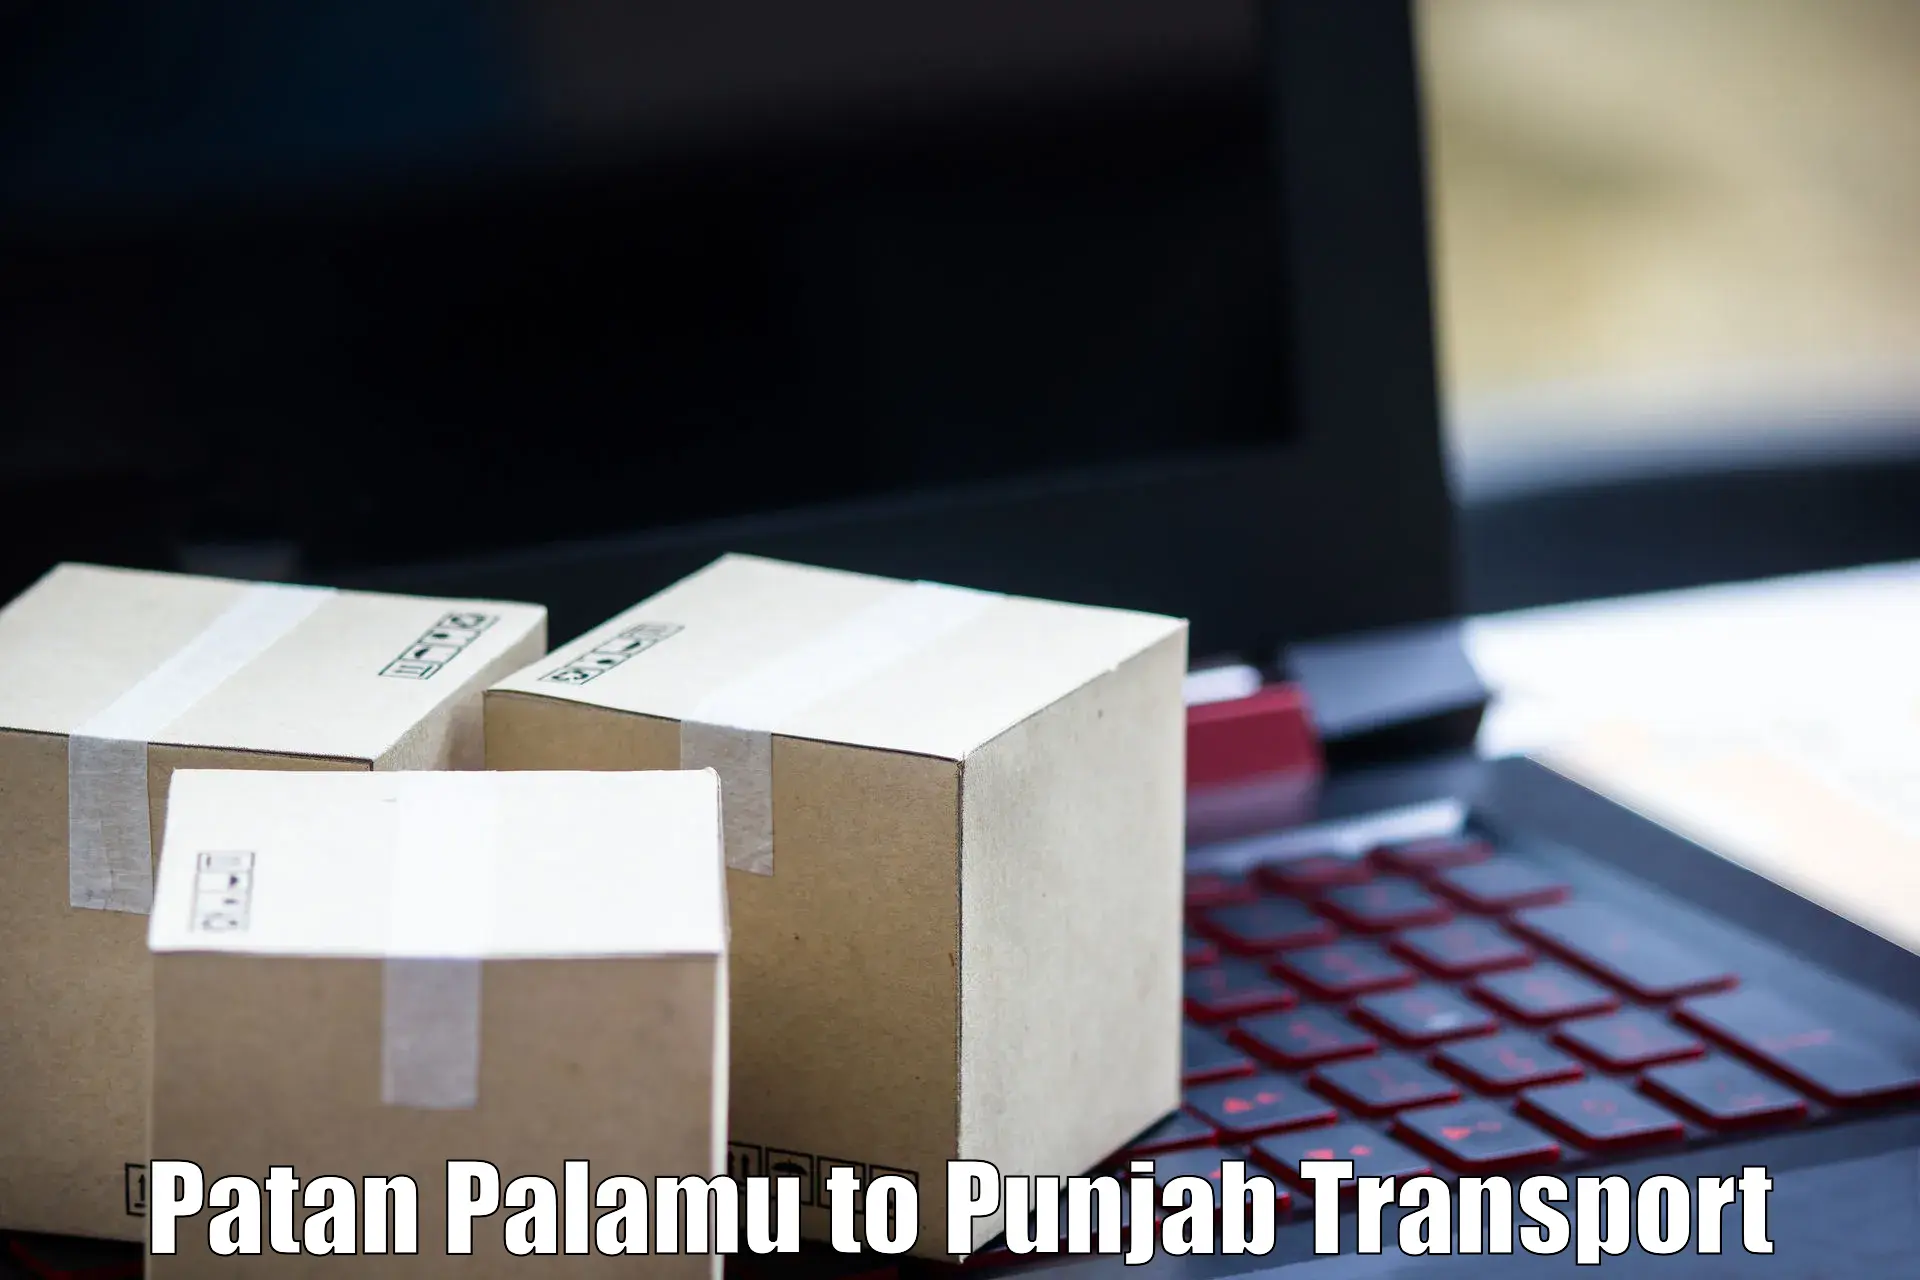 Nearby transport service Patan Palamu to Sultanpur Lodhi